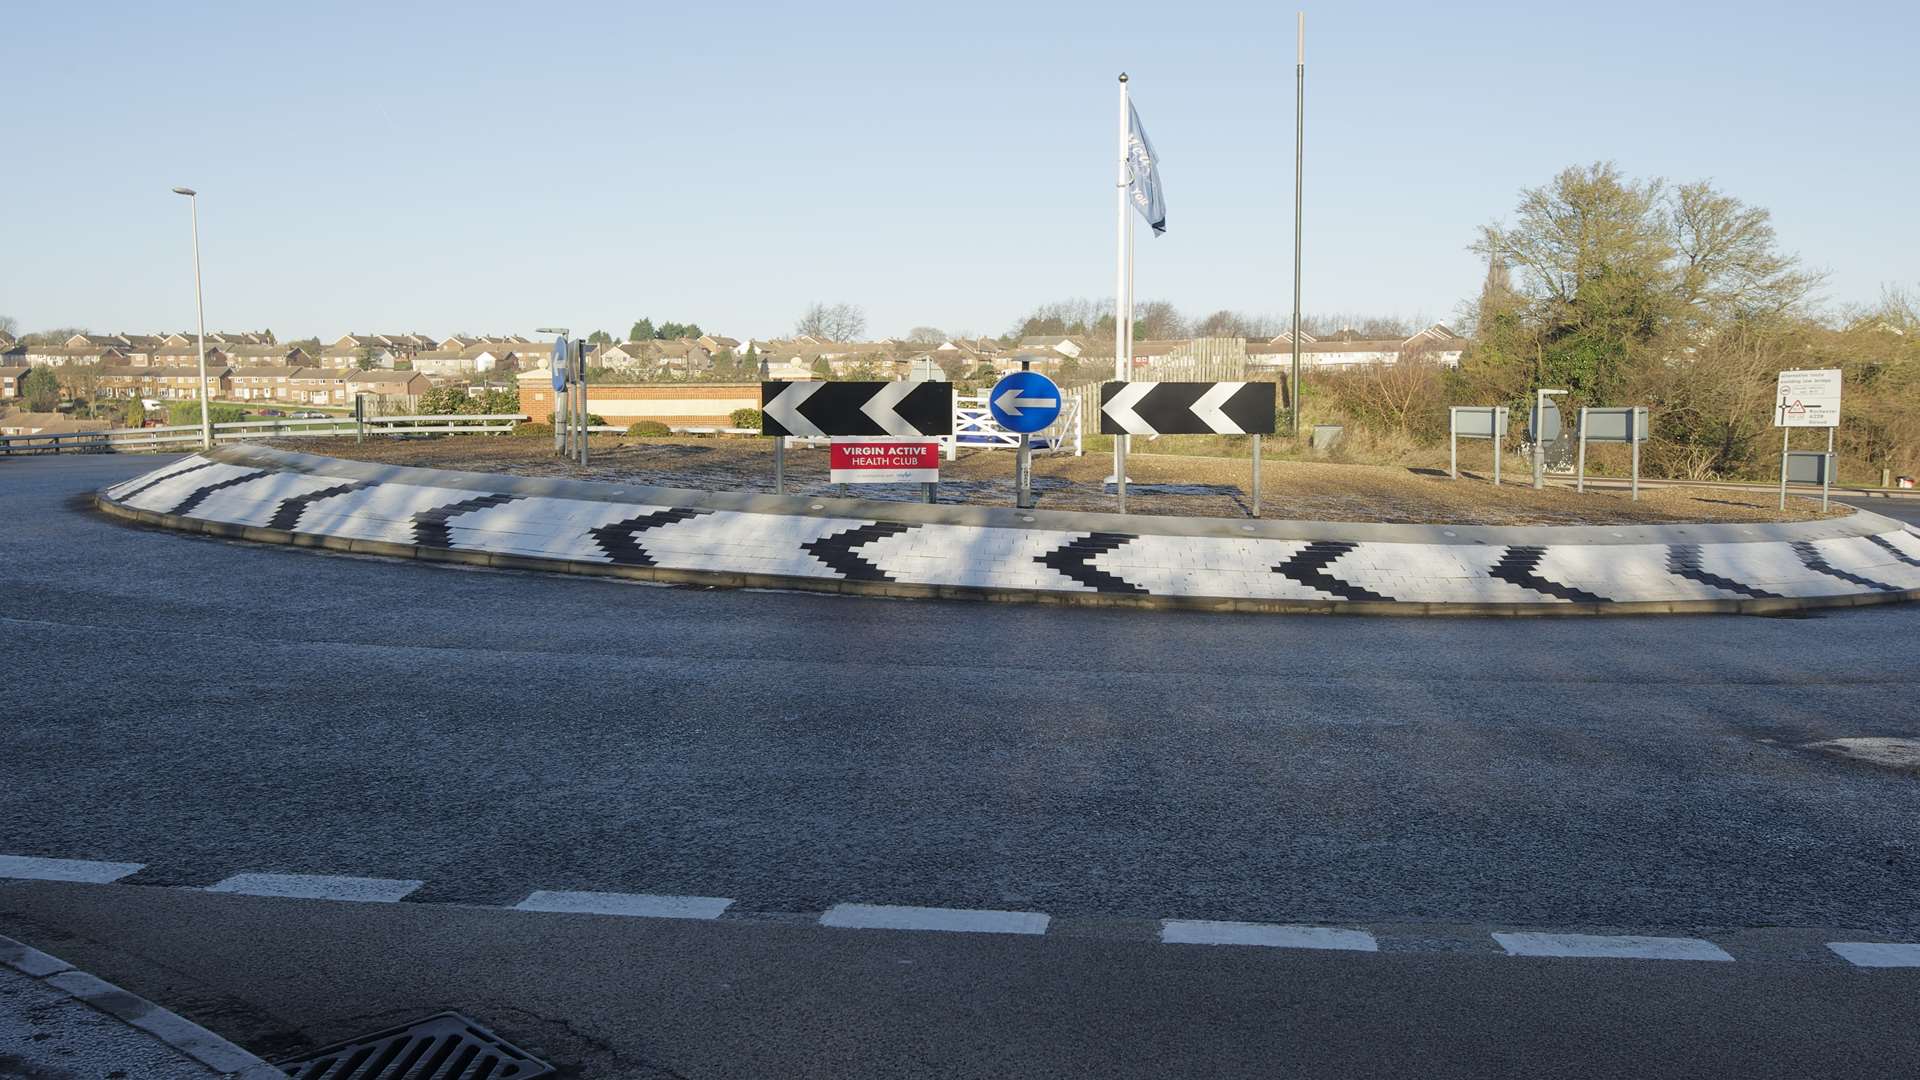 The roundabout where the woman crashed in Strood